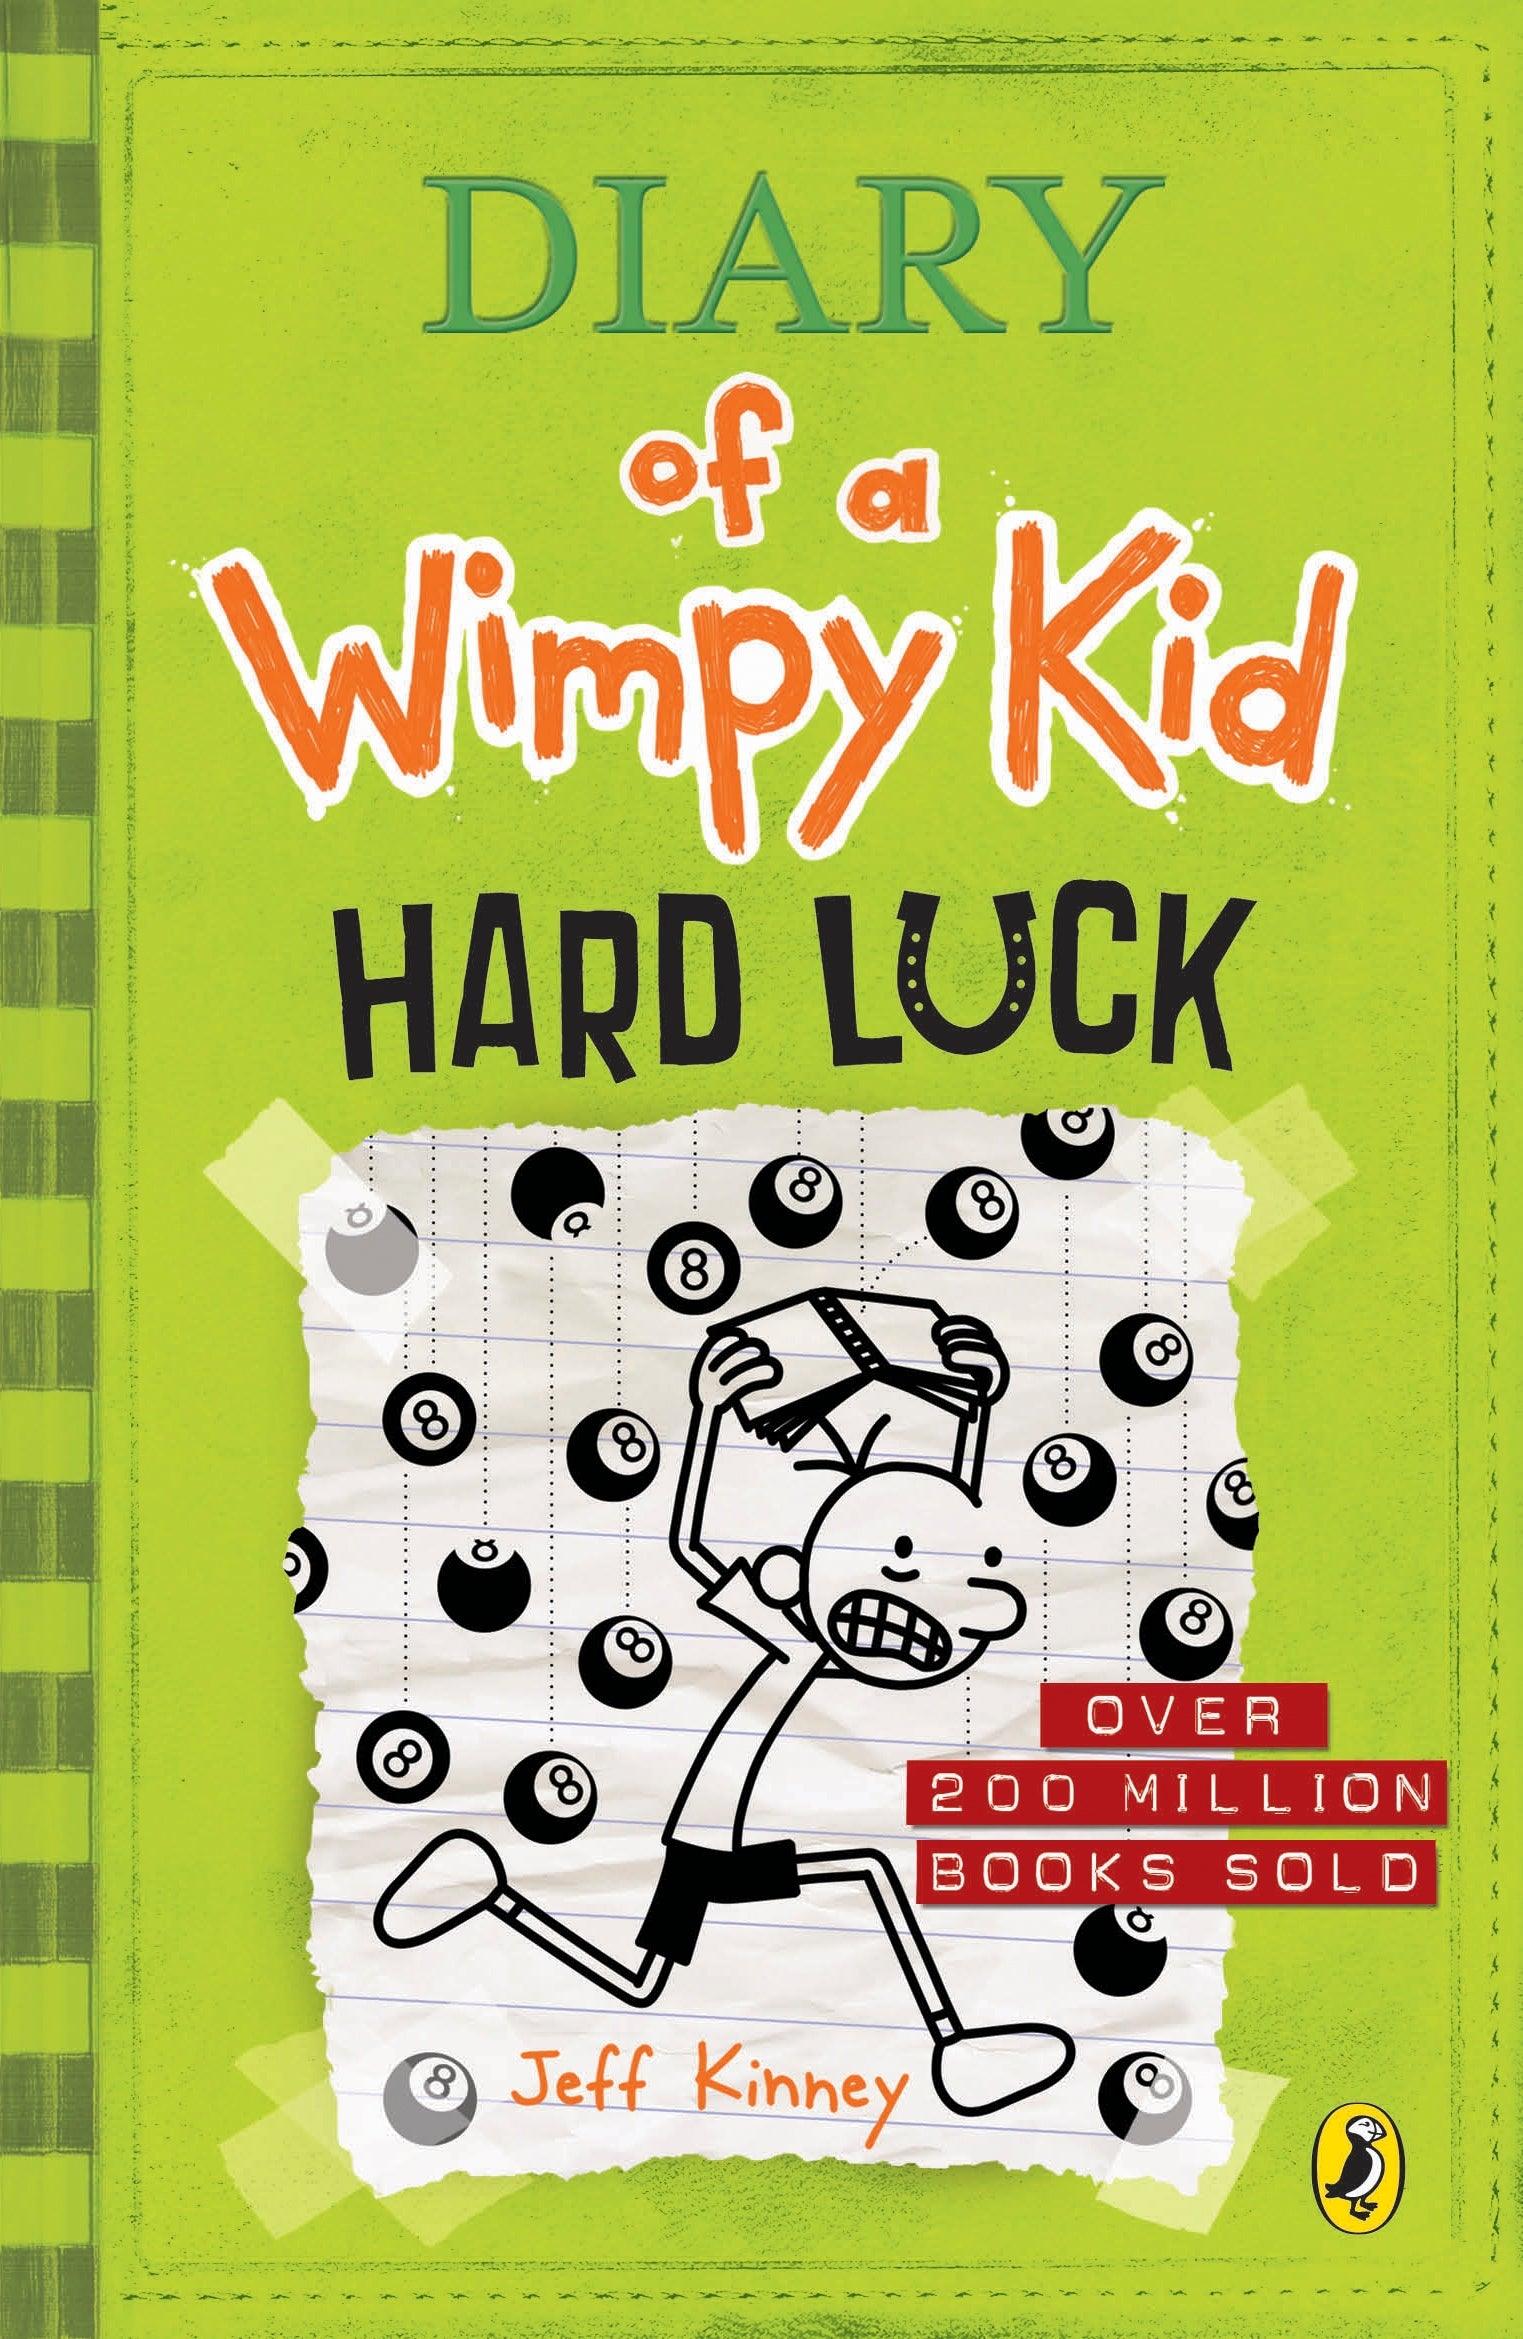 Diary of a Wimpy Kid #08 - HARD LUCK - Spectrawide Bookstore